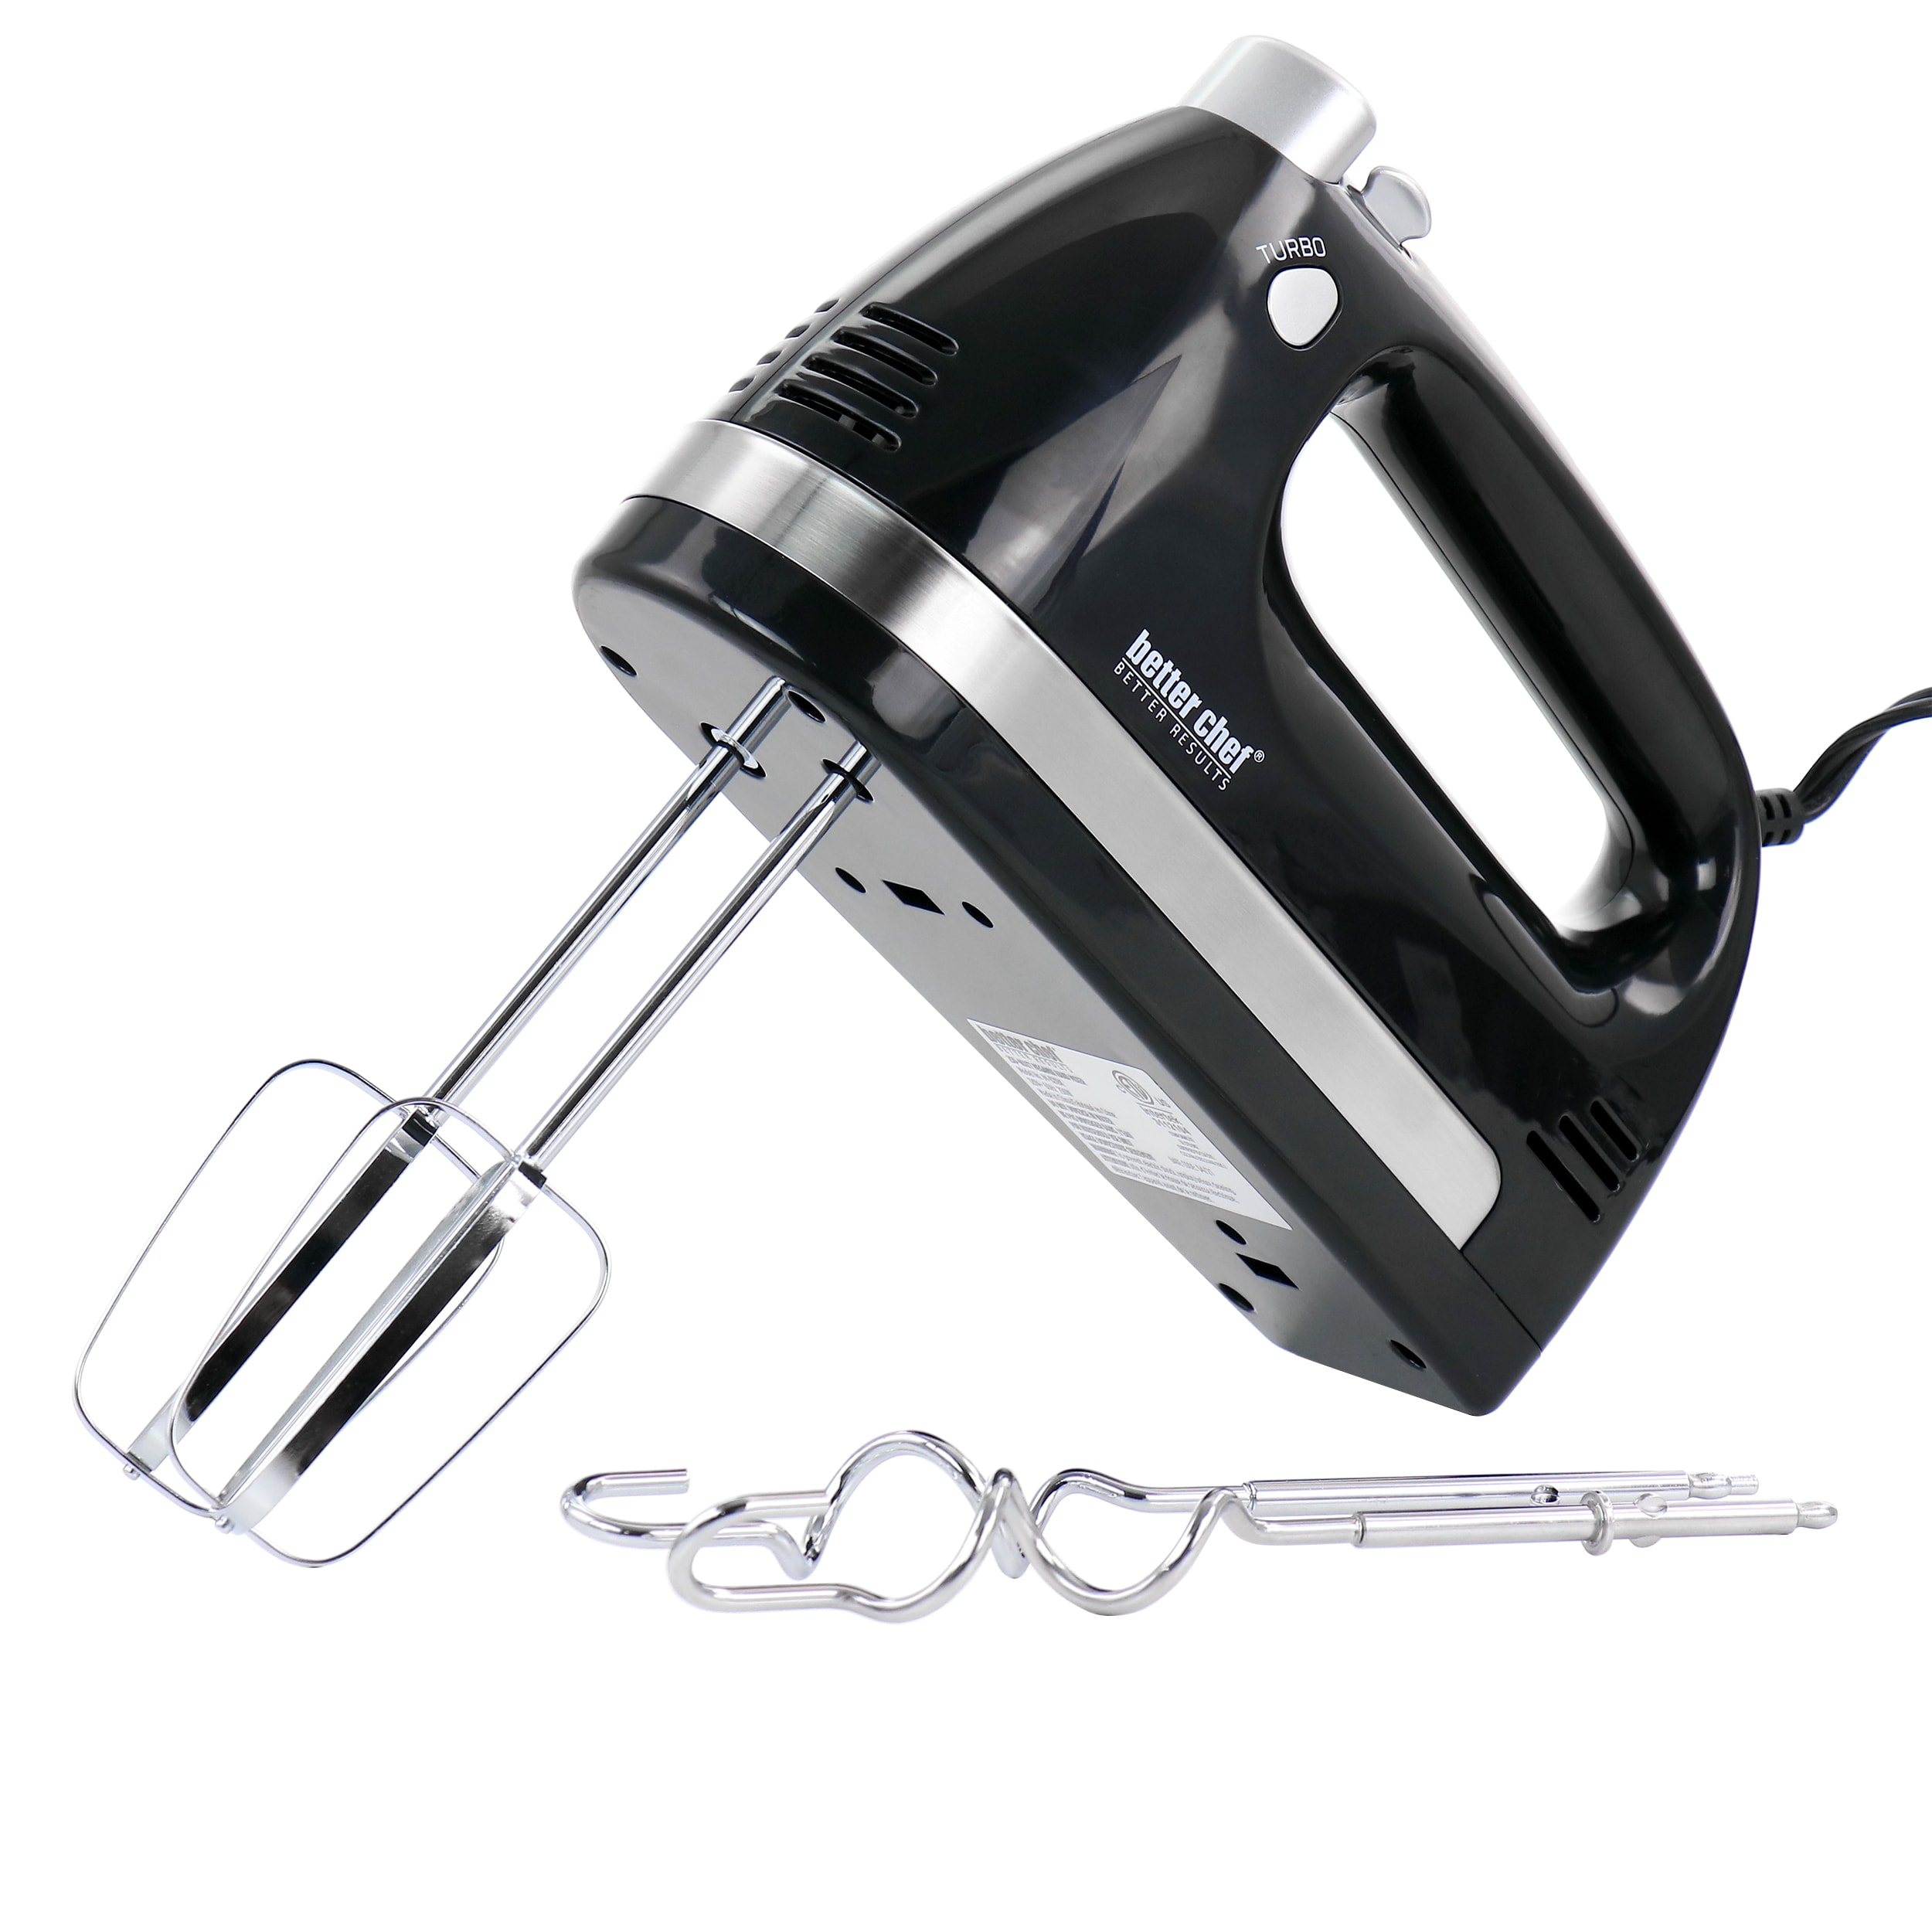 Courant 250W 5-Speed Hand Mixer 